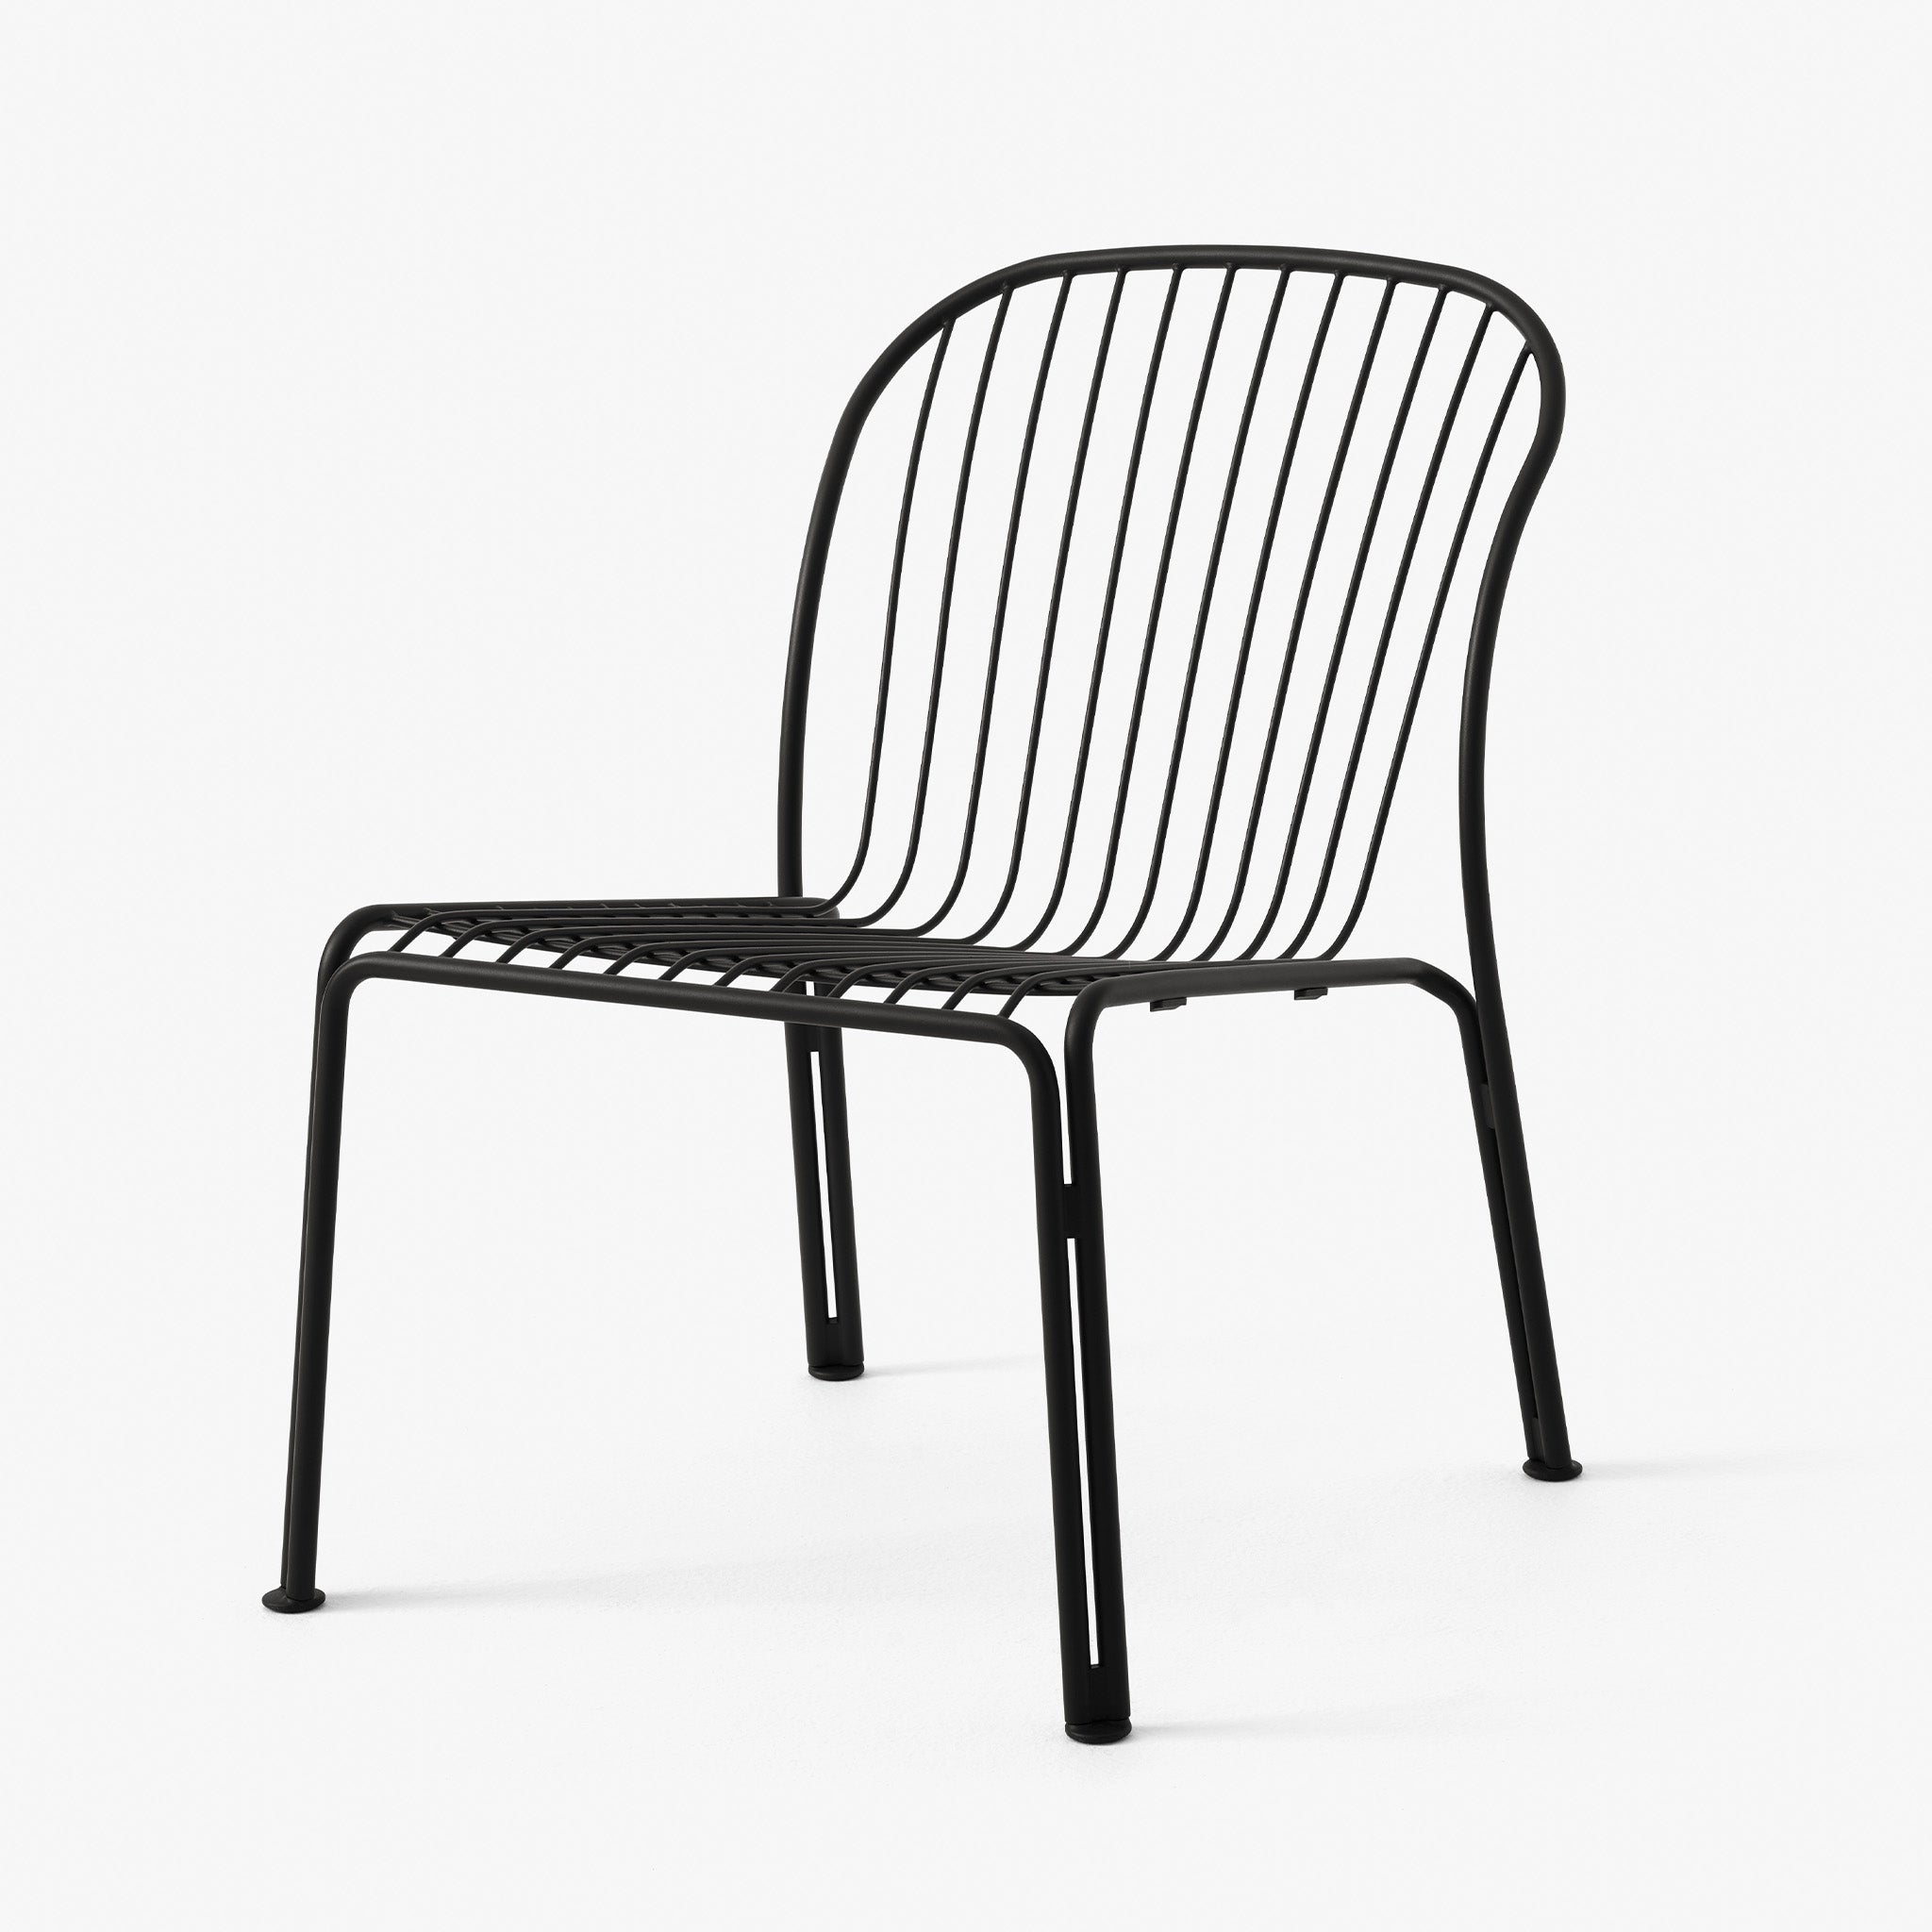 Thorvald SC100 Outdoor Lounge Chair by Space Copenhagen